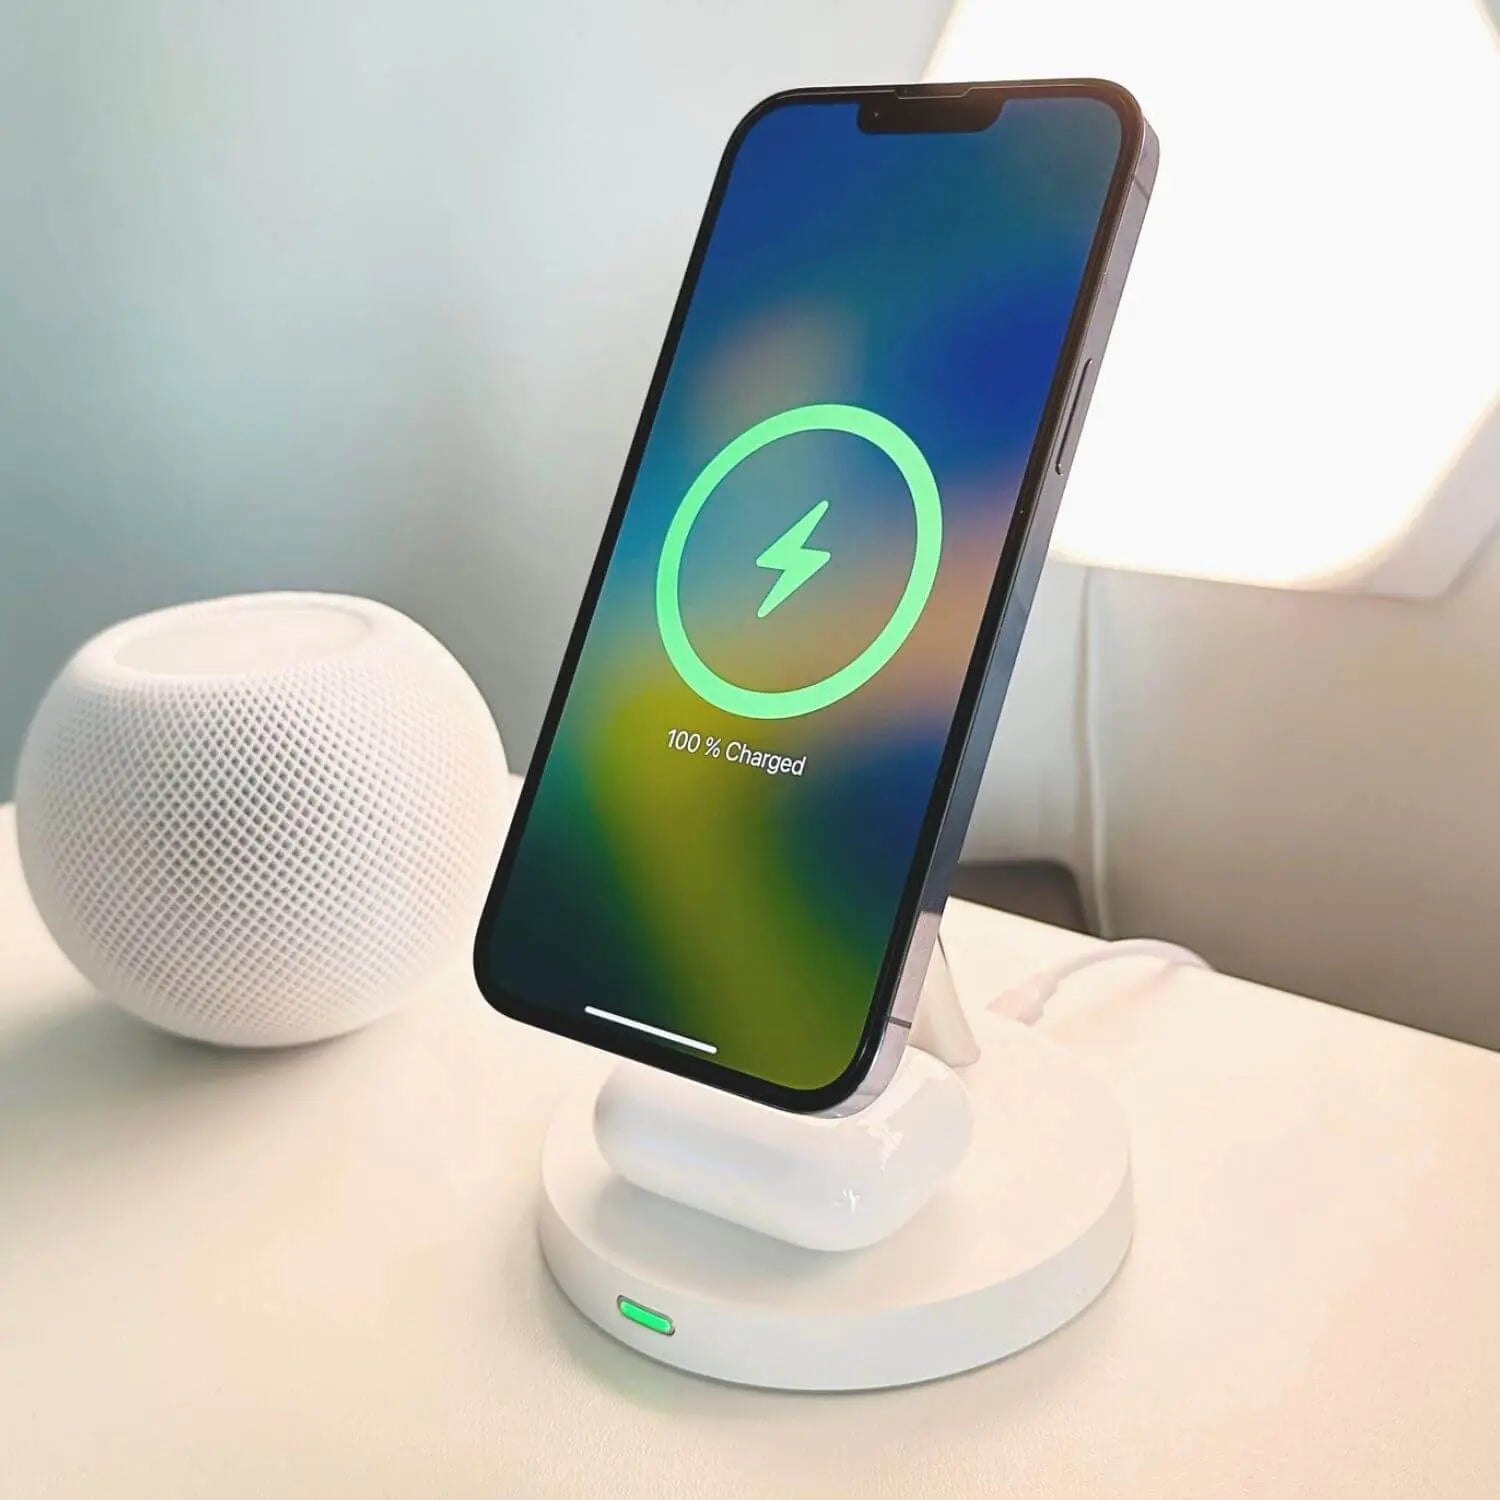 Key Things to Look For When Buying a Wireless Charger